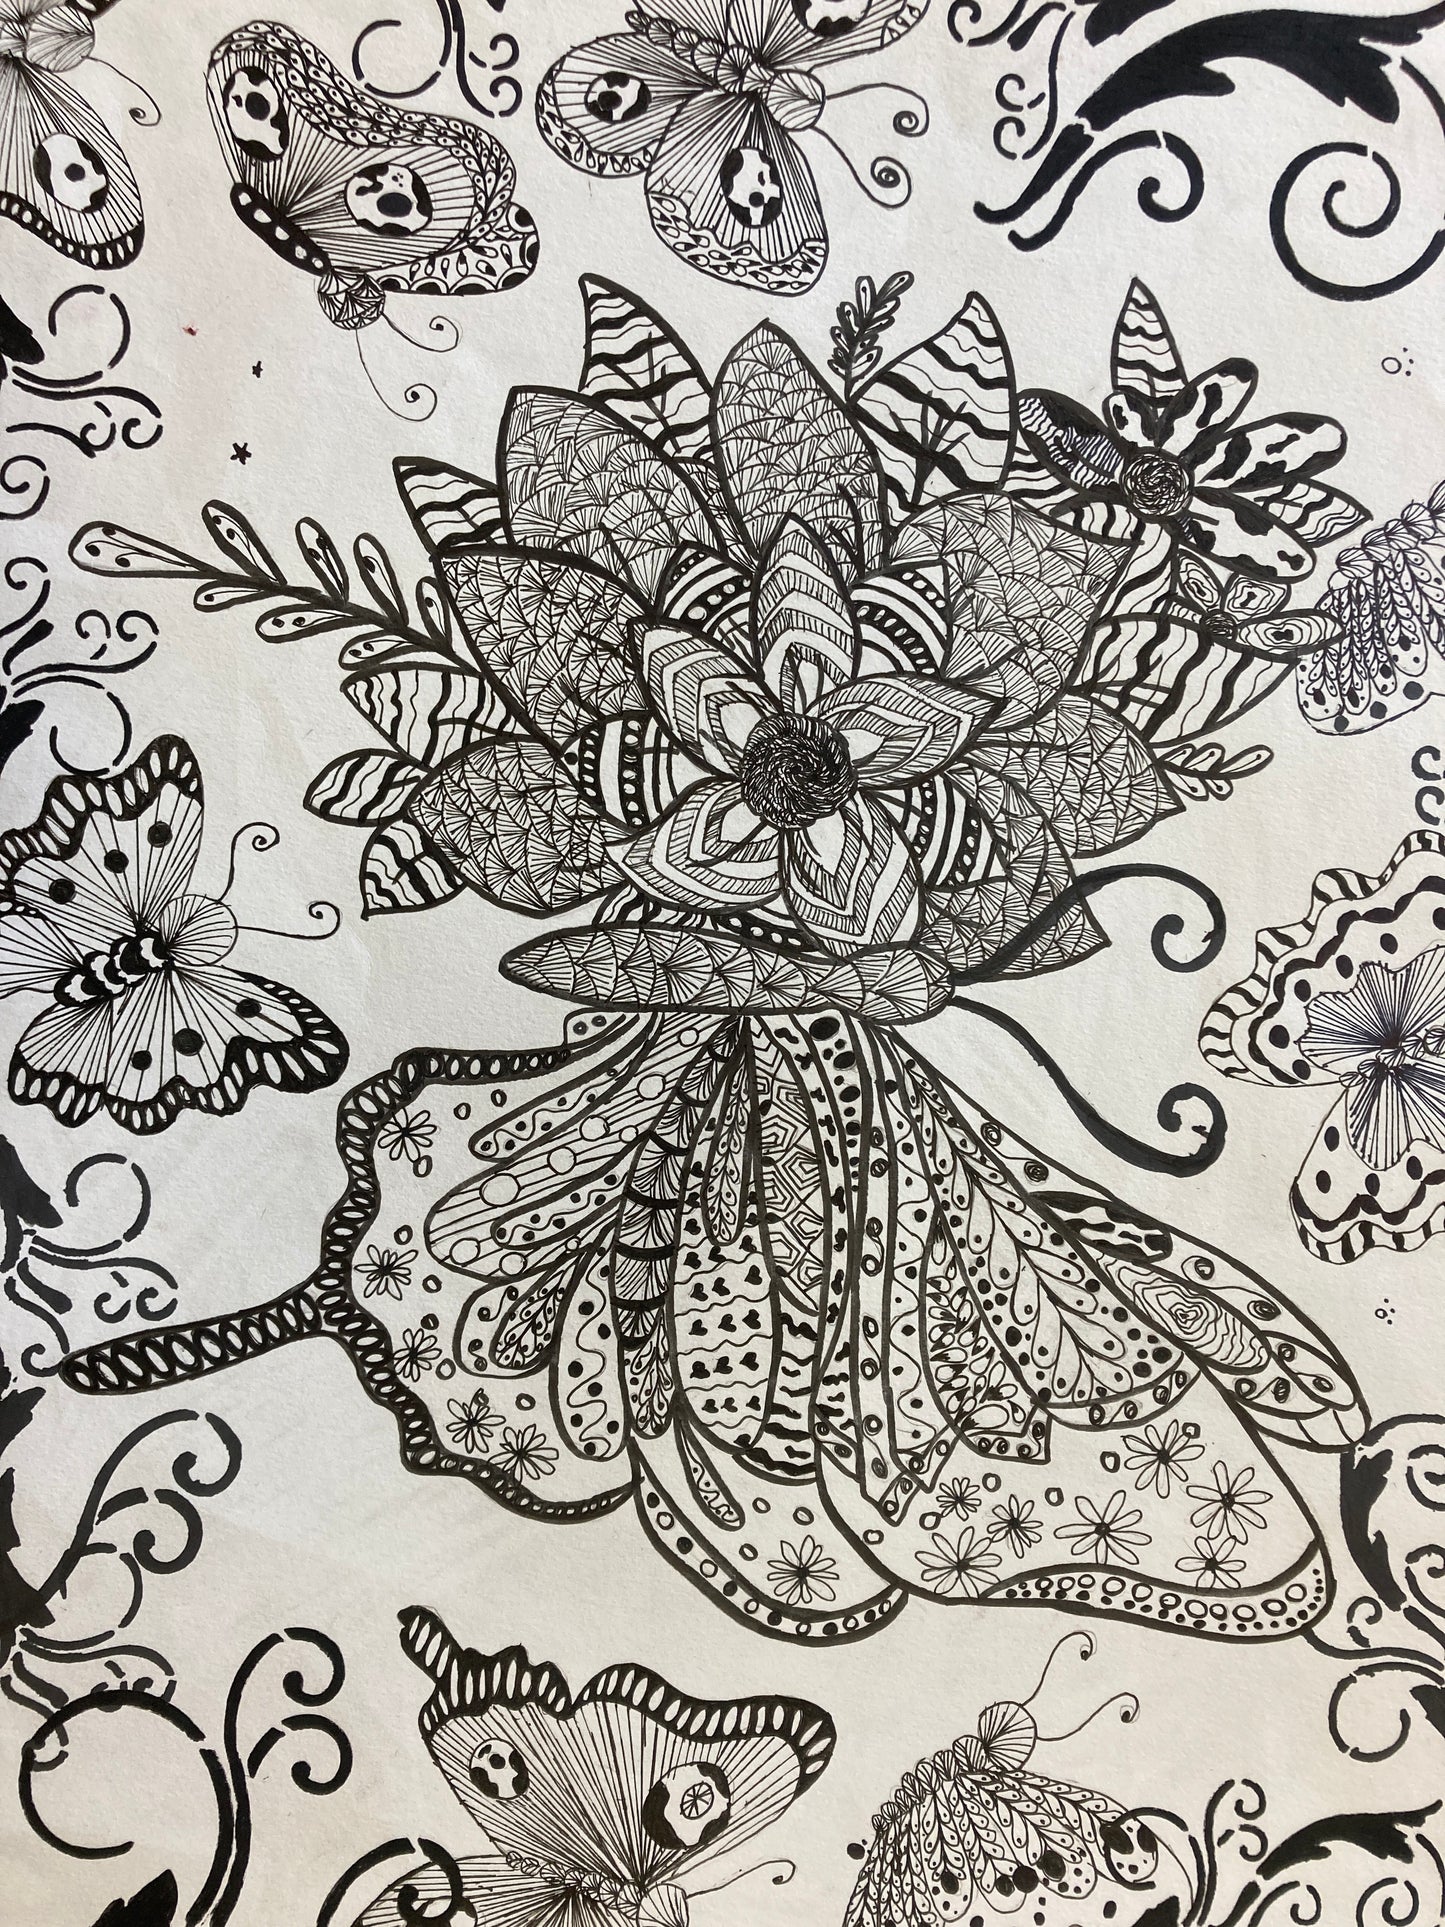 Zentangle - What Interests Me Project (Katherin)